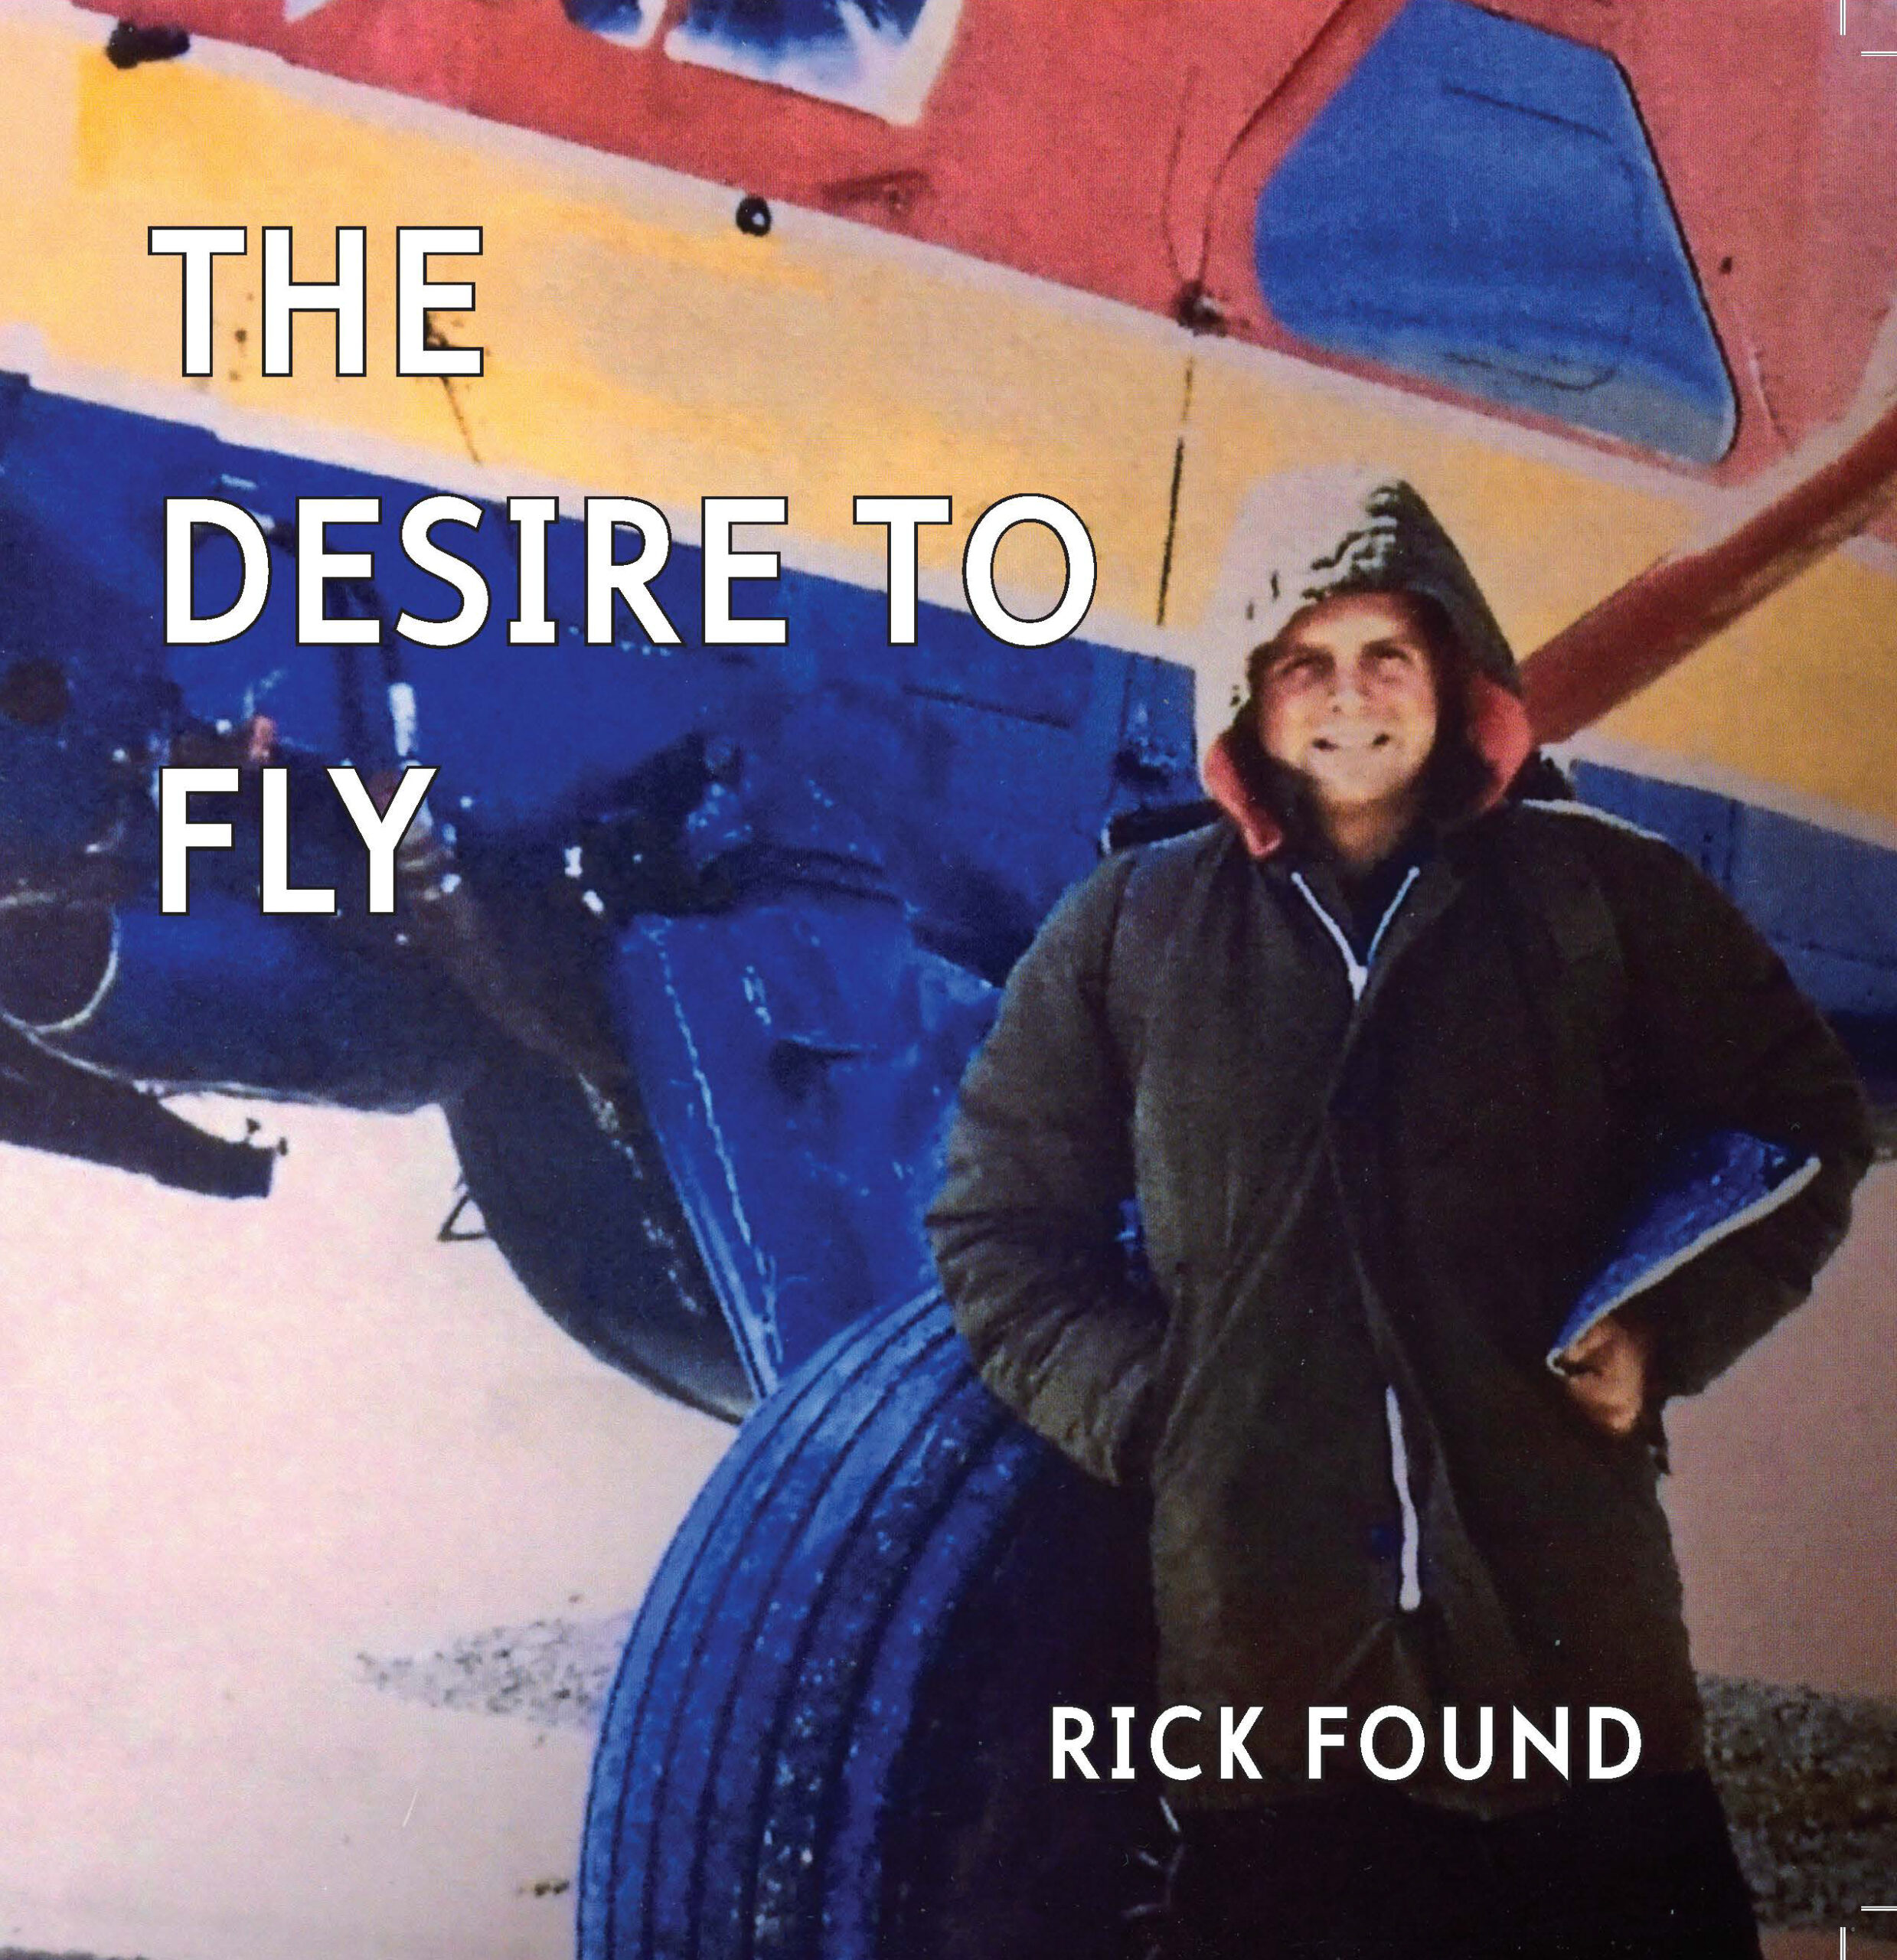 The Desire to Fly by Rick Found